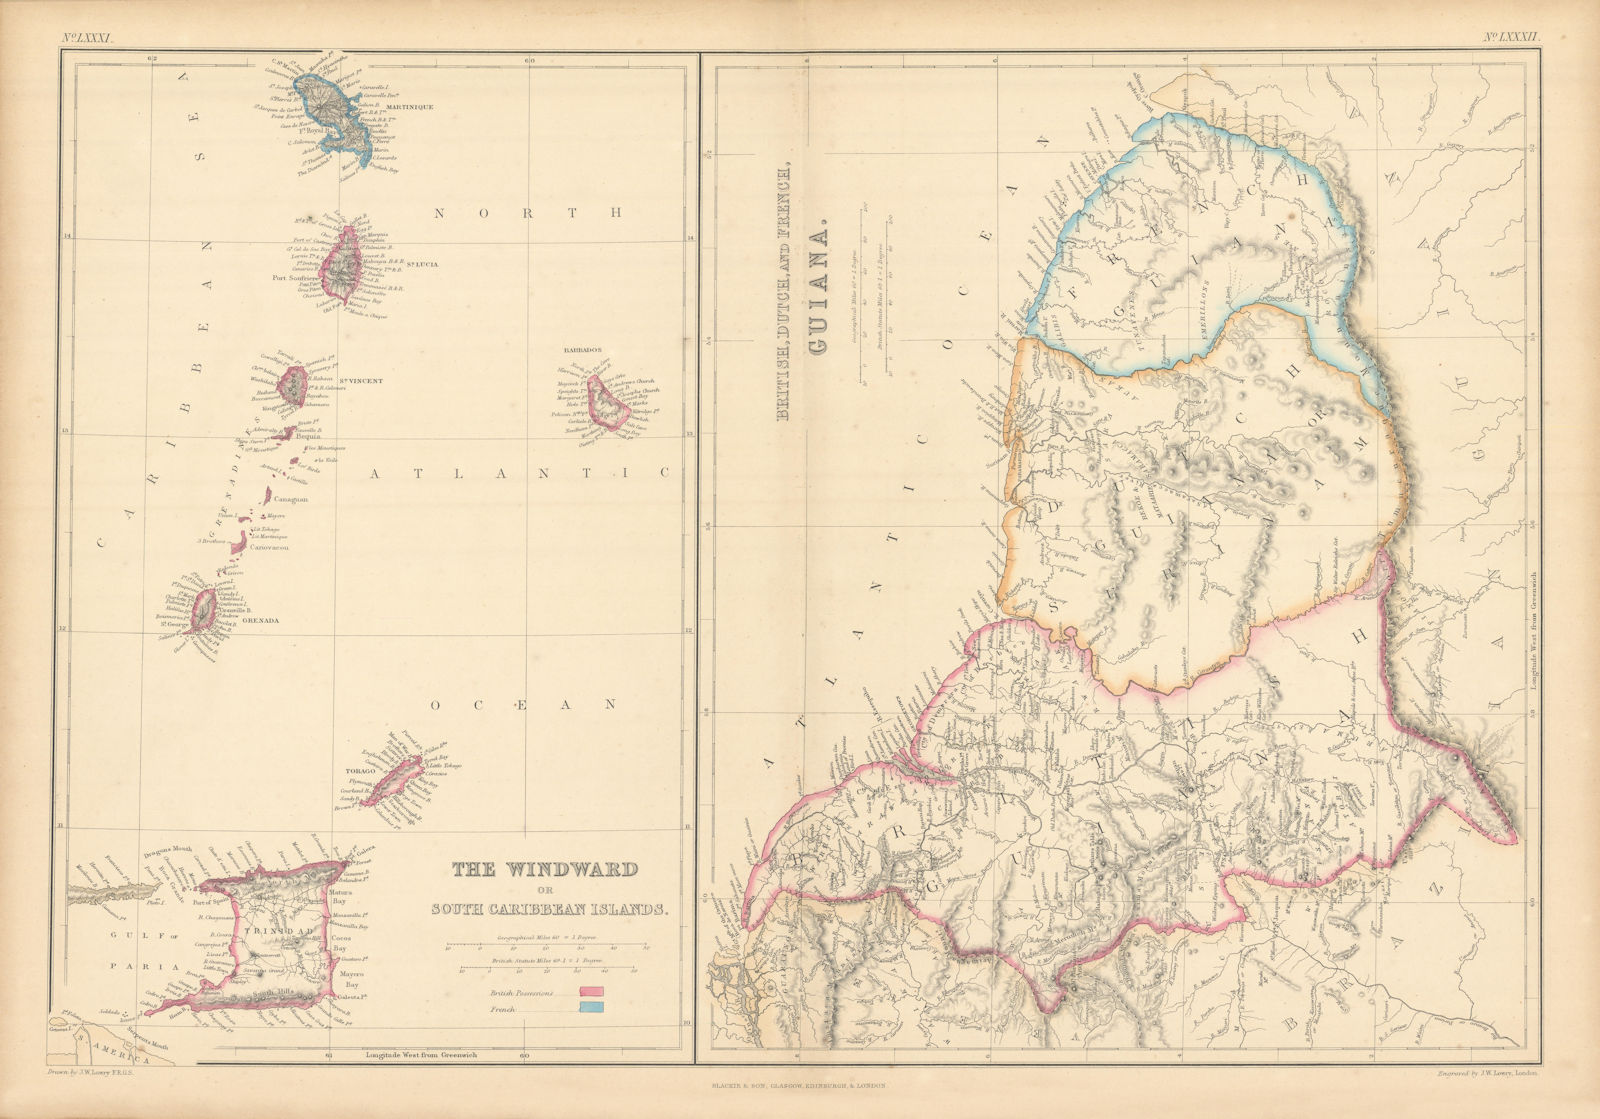 Windward or South Caribbean Islands. Barbados St. Lucia. Guianas. LOWRY 1859 map